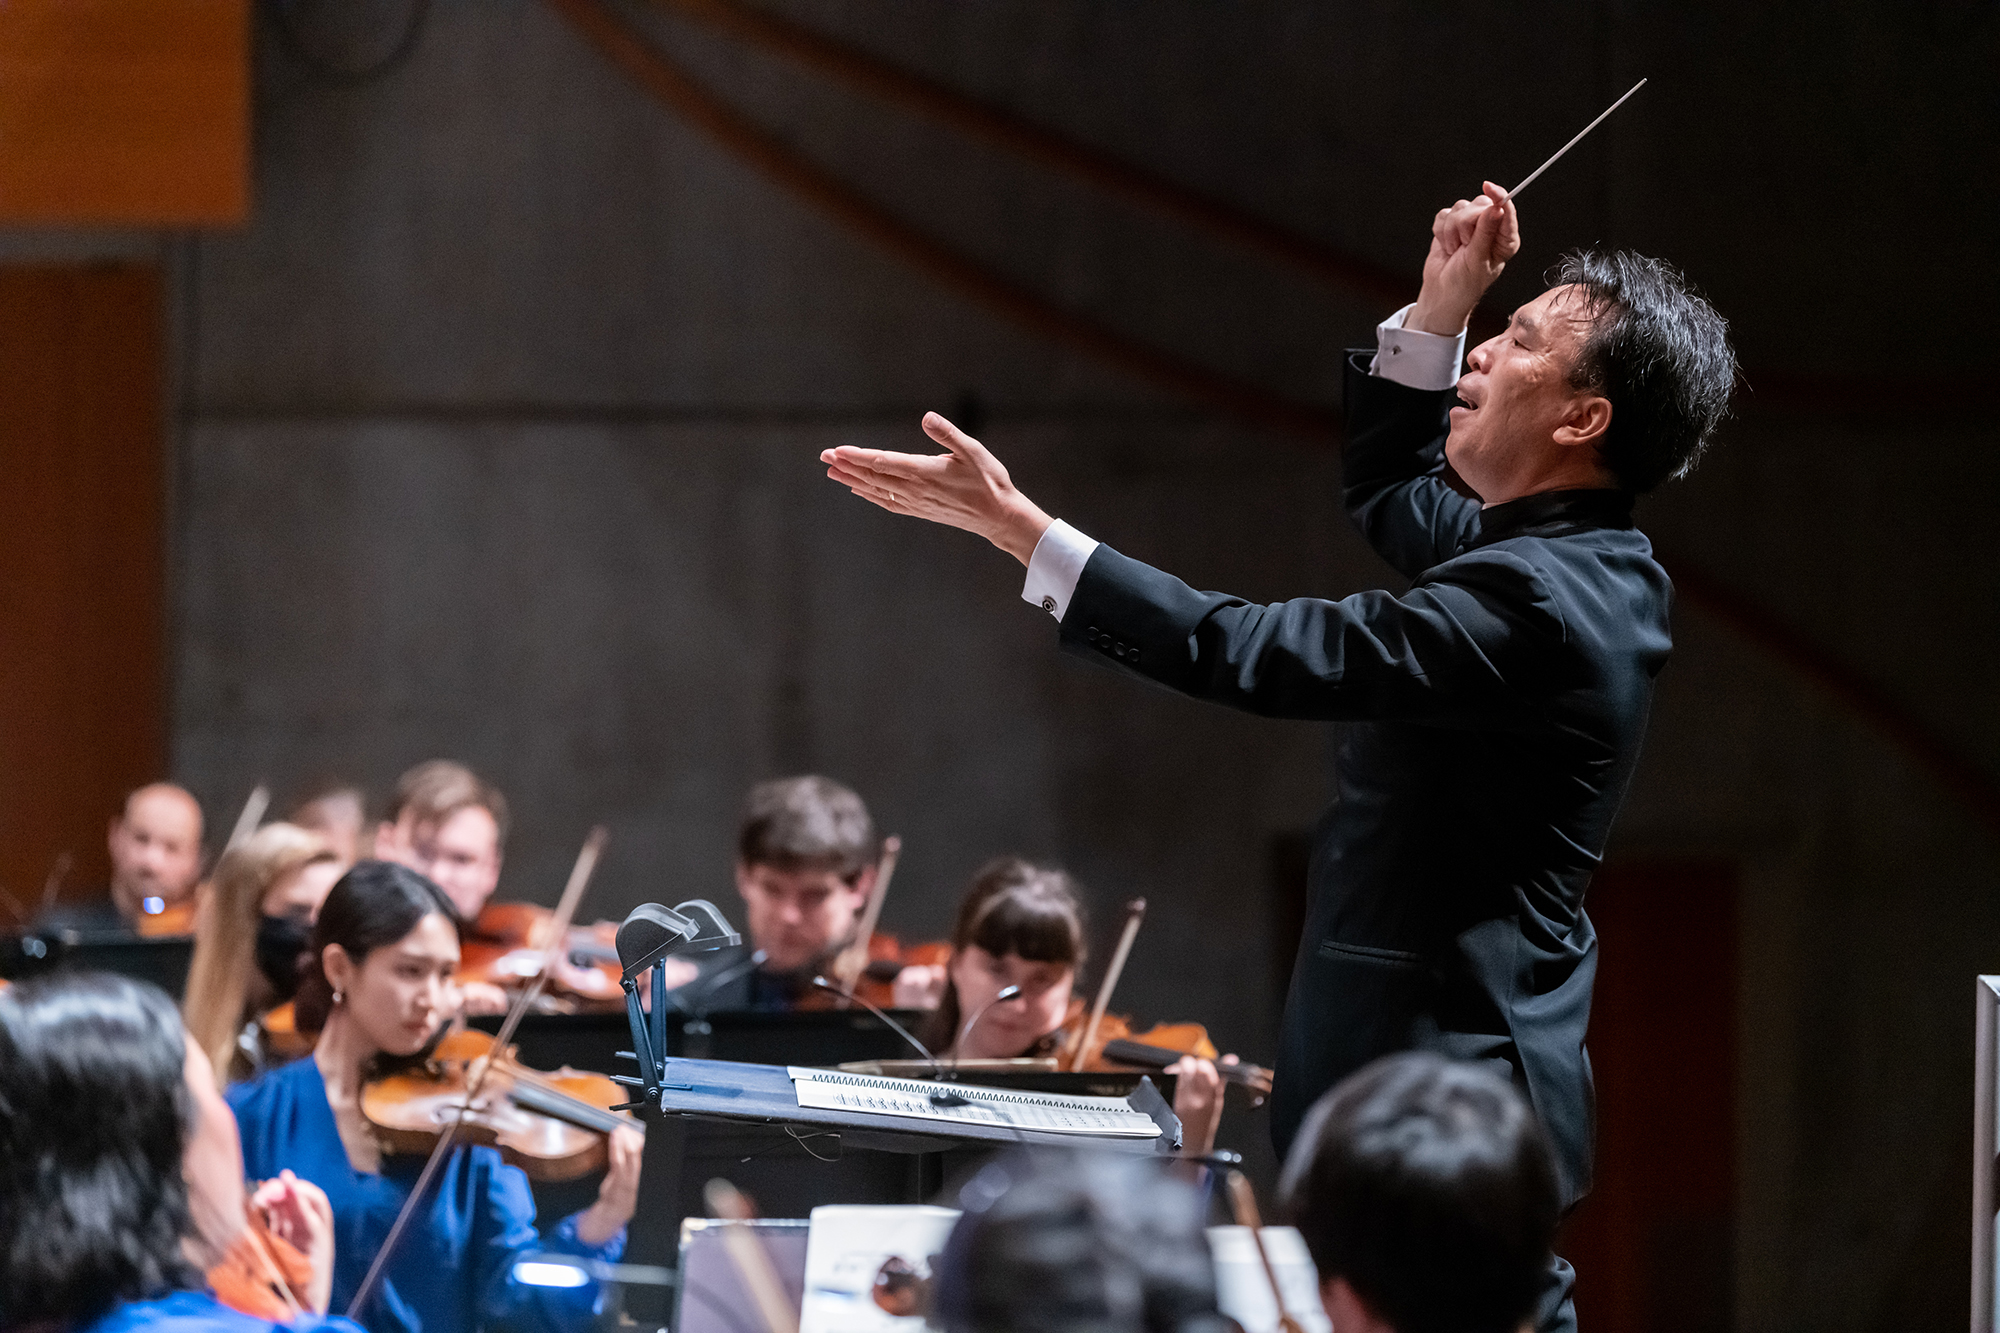 Jindong Cai conducting The Orchestra Now at the 2021 China Now Music Festival. Photo by Karl Rabe